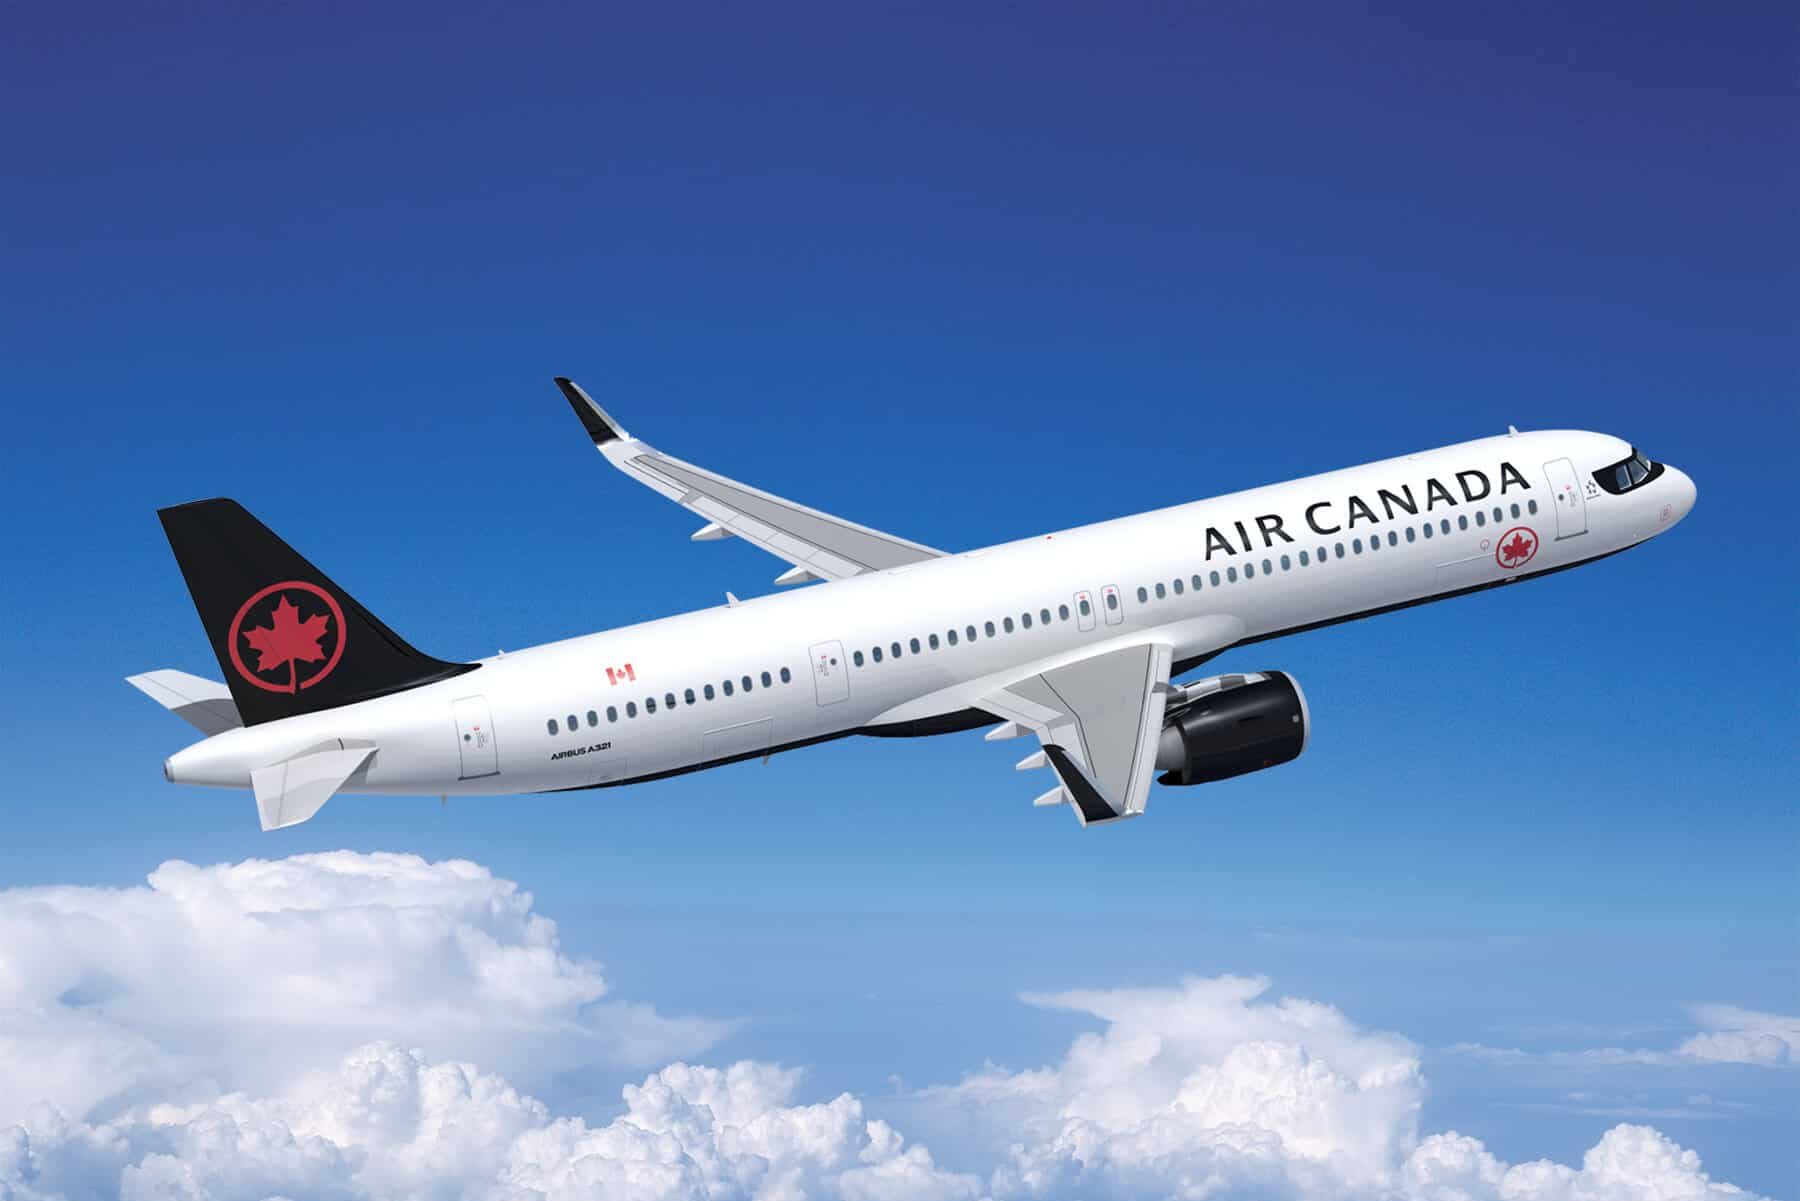 New Details about Air Canada’s Airbus A321XLR Business Class